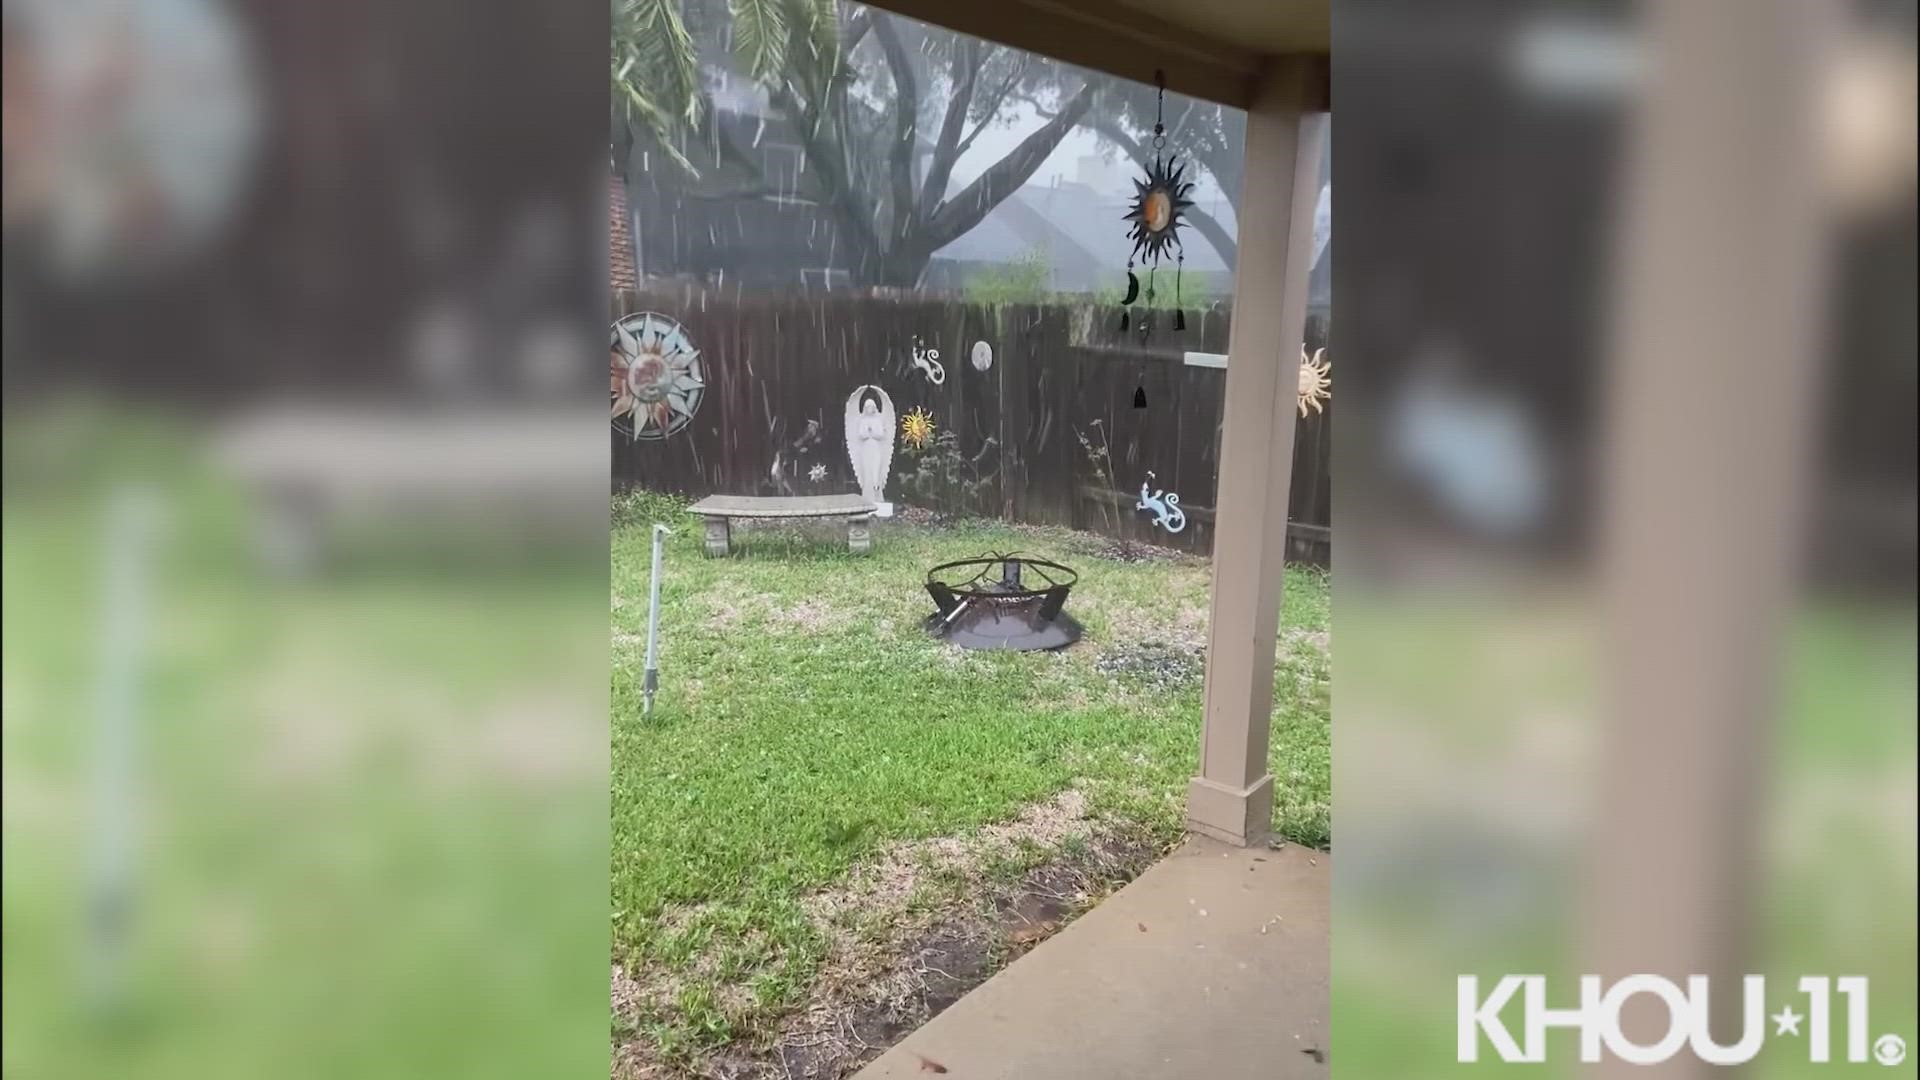 Hail falling in Pearland, Texas. Video shot by Eddie Rivera.